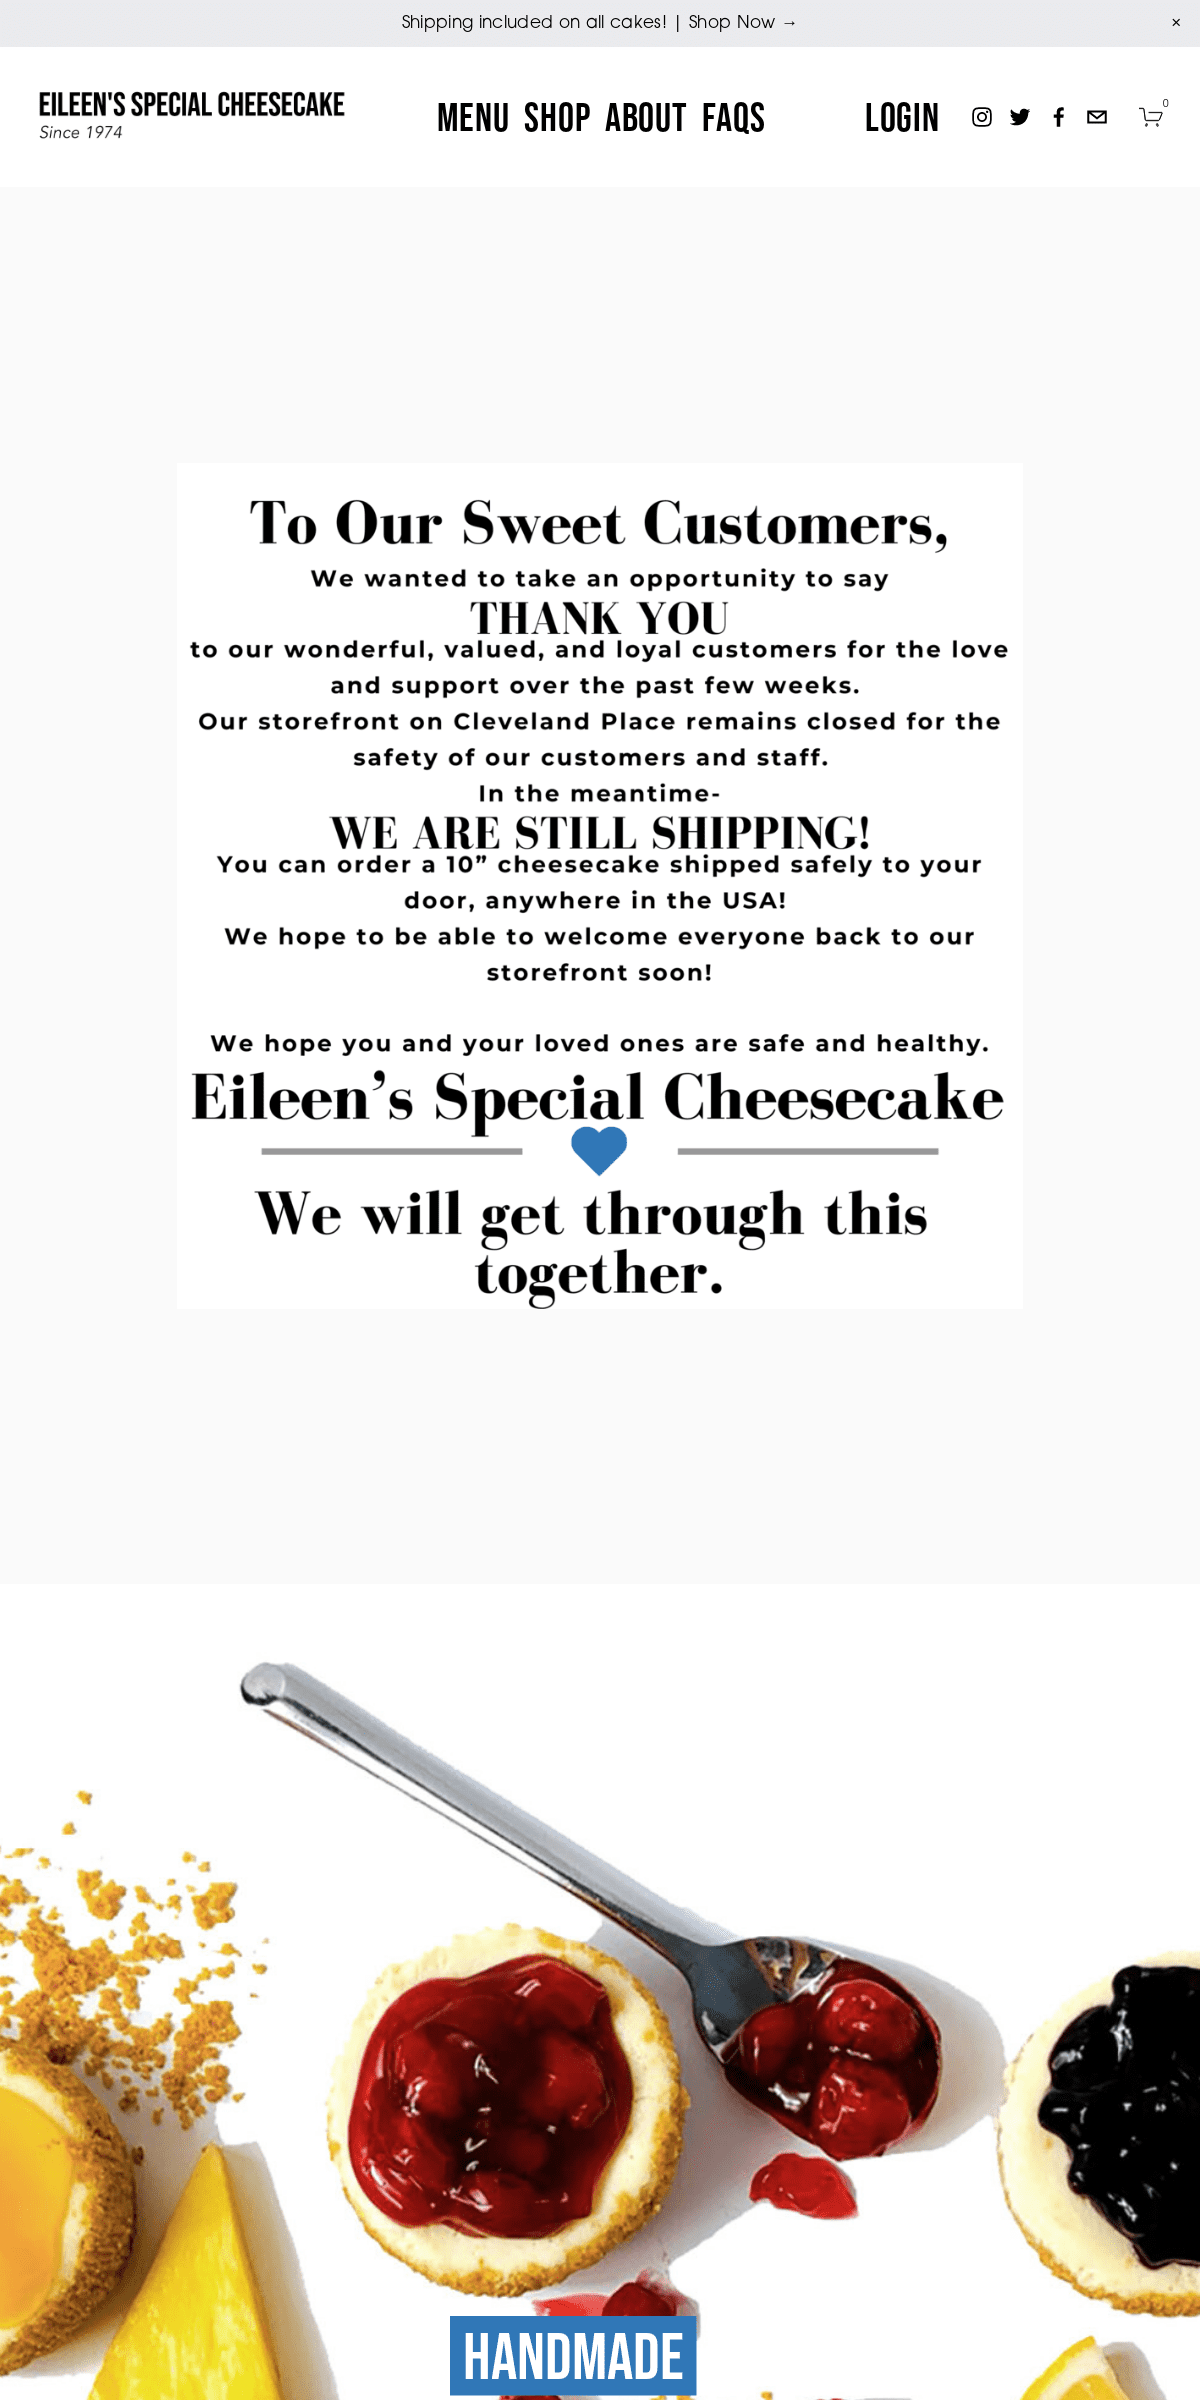 A complete backup of eileenscheesecake.com